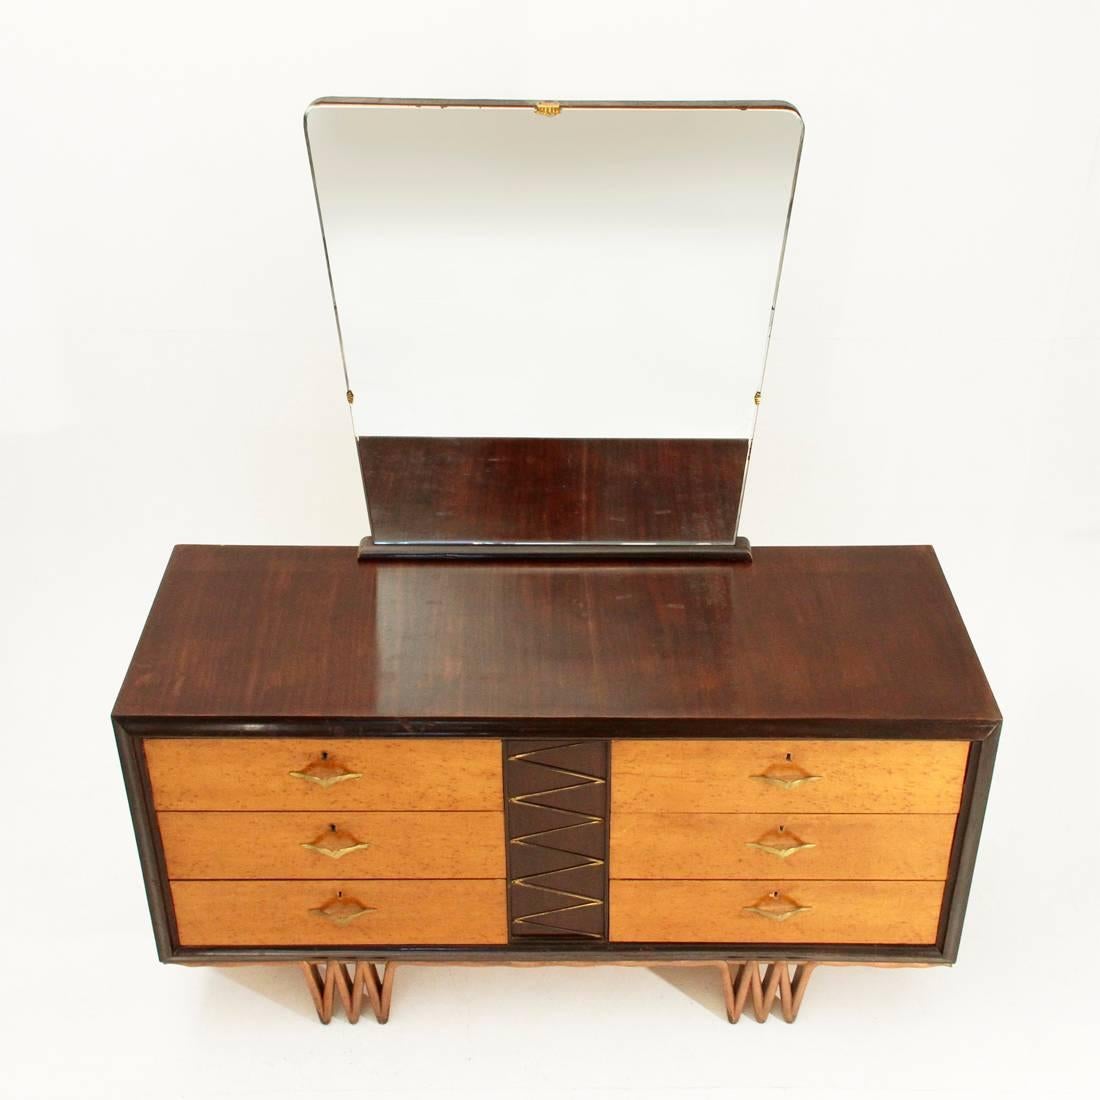 Italian furniture manufacturing in the 1940s.
Honeycomb core structure, veneered in various woods.
Framed front and central brass decoration.
Drawers with lock and brass handle in the shape of a seagull.
Shaped wood front legs painted in